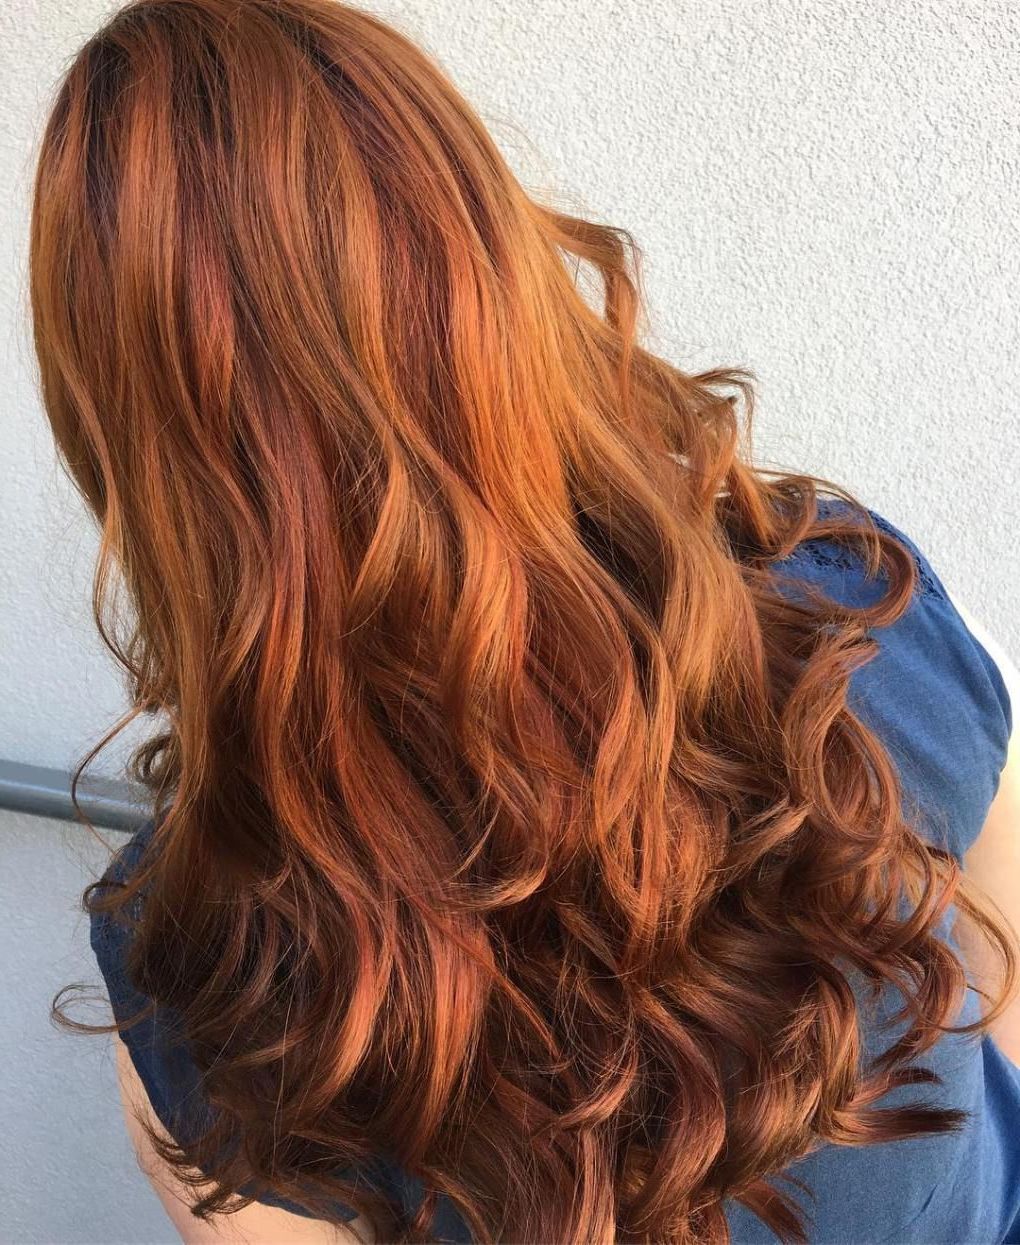 20 Burnt Orange Hair Color Ideas To Try In 2018 | Styles | Pinterest With Burnt Orange Bob Hairstyles With Highlights (View 4 of 20)